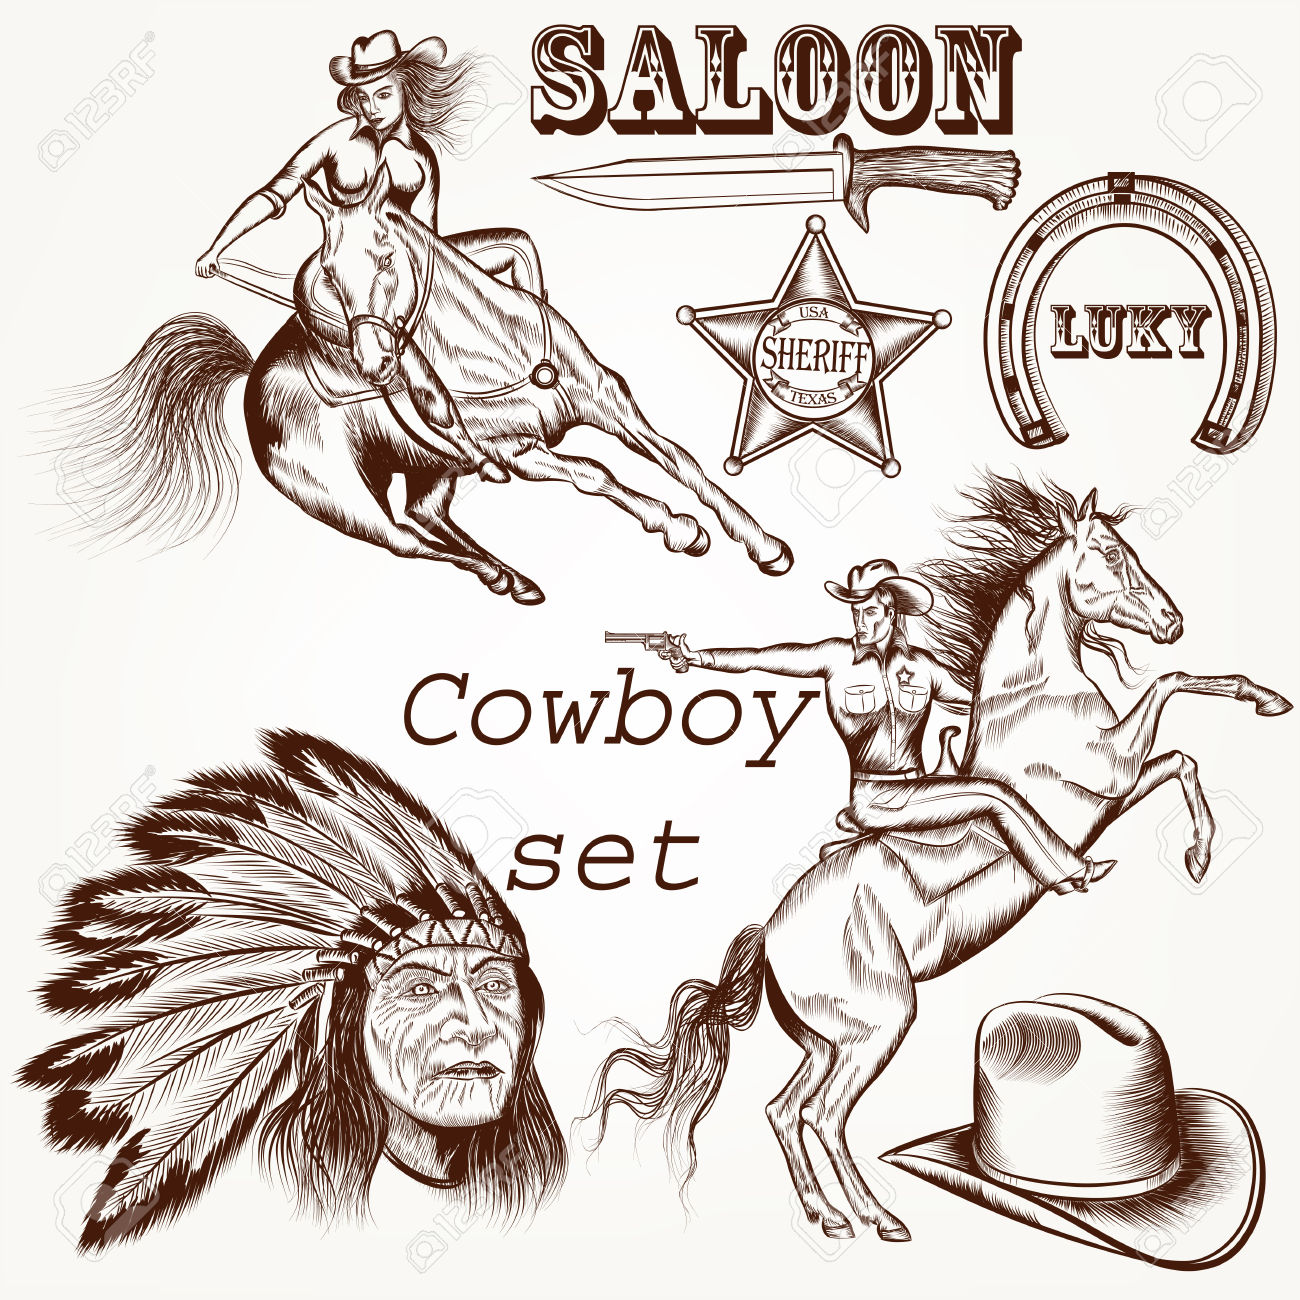 964 Cowboys And Indians Stock Illustrations, Cliparts And Royalty.